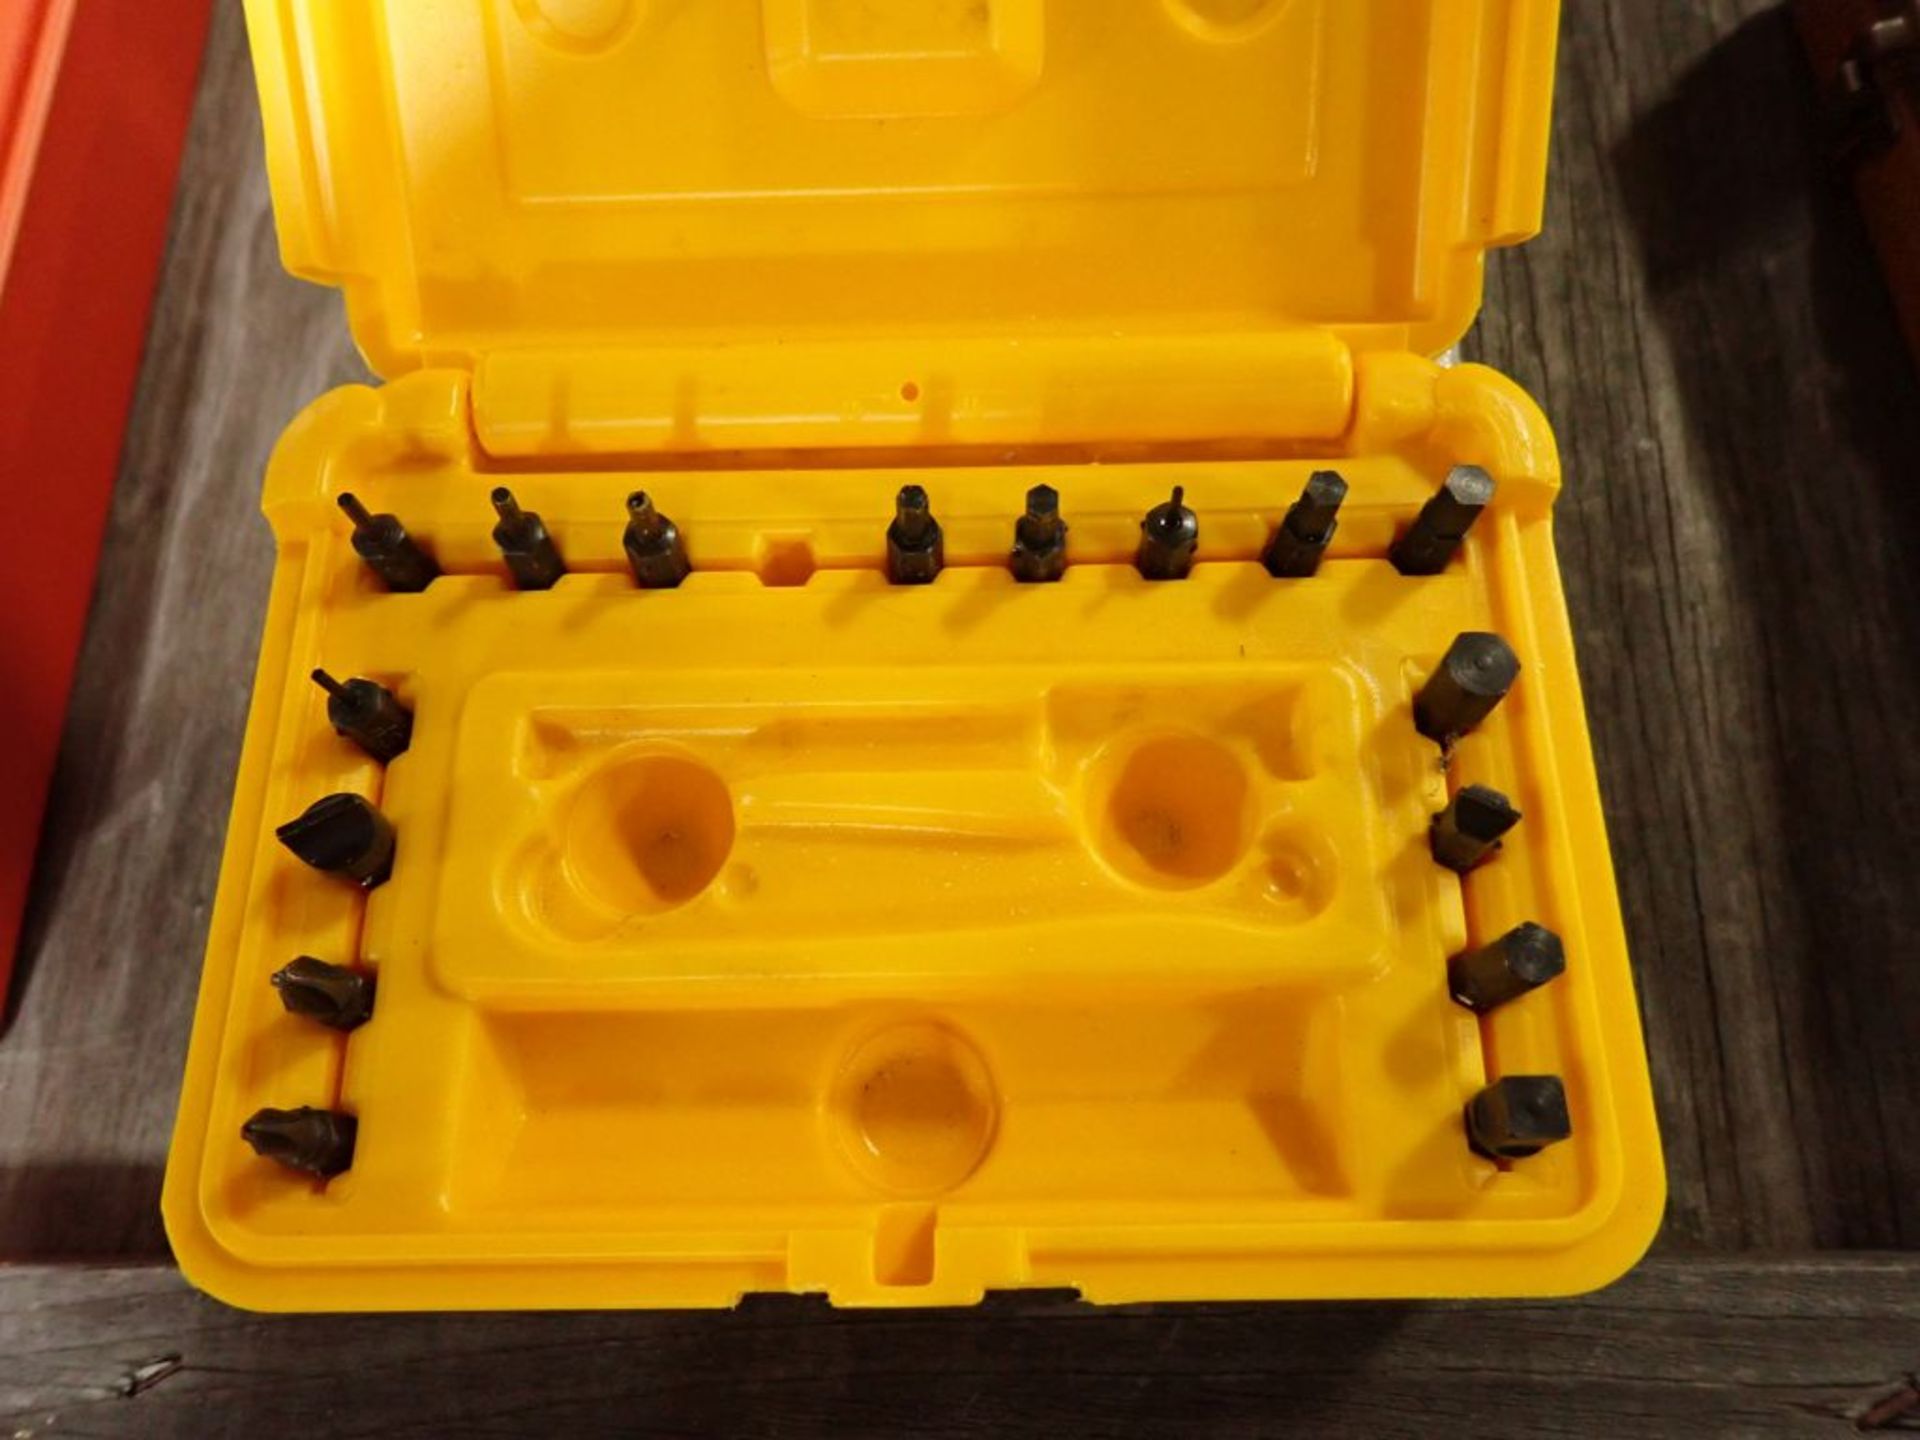 Lot of Assorted Inspection Tools | Tag: 241467 | Limited Forklift Assistance Available - $10.00 - Image 24 of 24